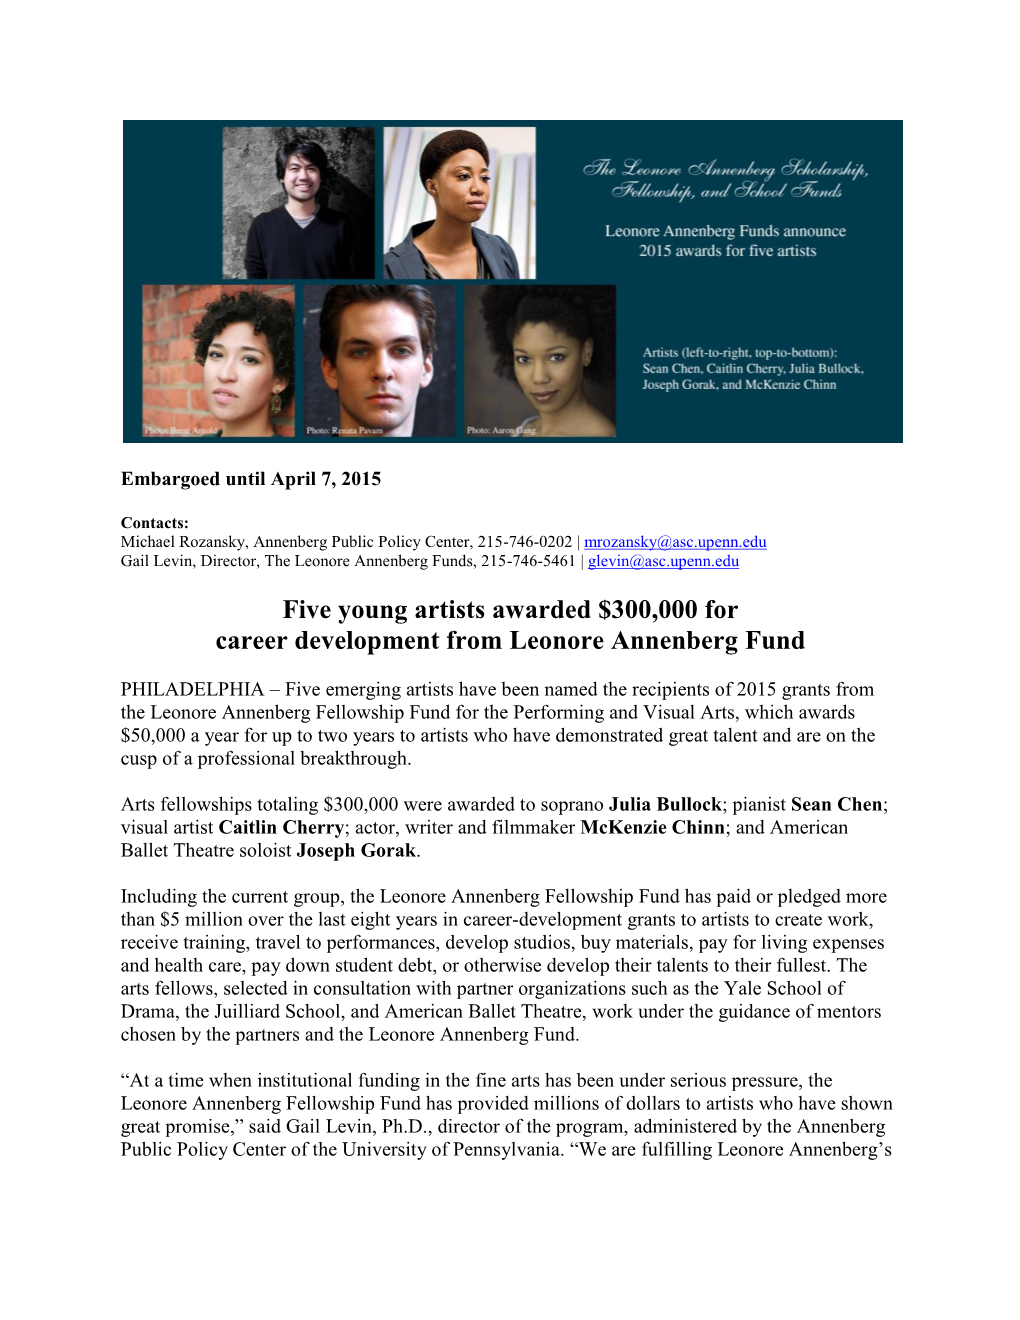 Five Young Artists Awarded $300,000 for Career Development from Leonore Annenberg Fund